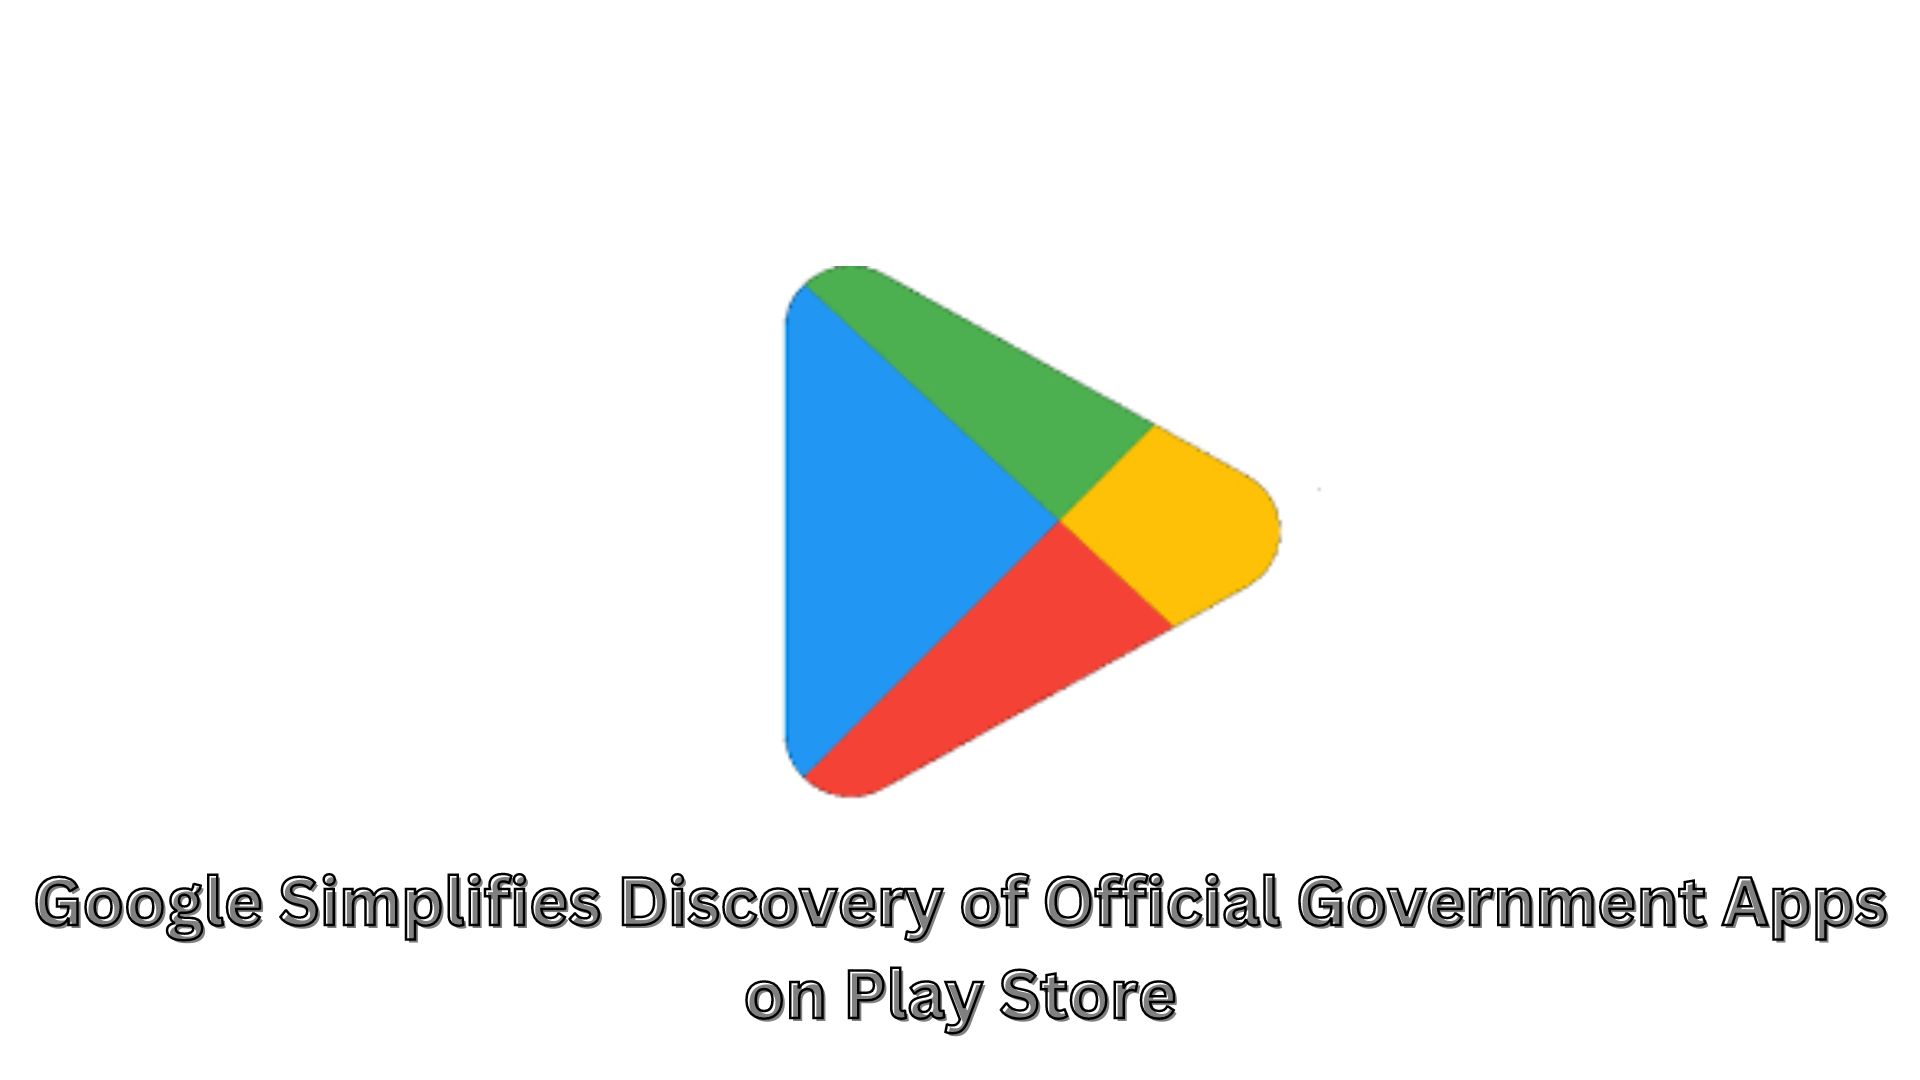 Google Simplifies Discovery of Official Government Apps on Play Store